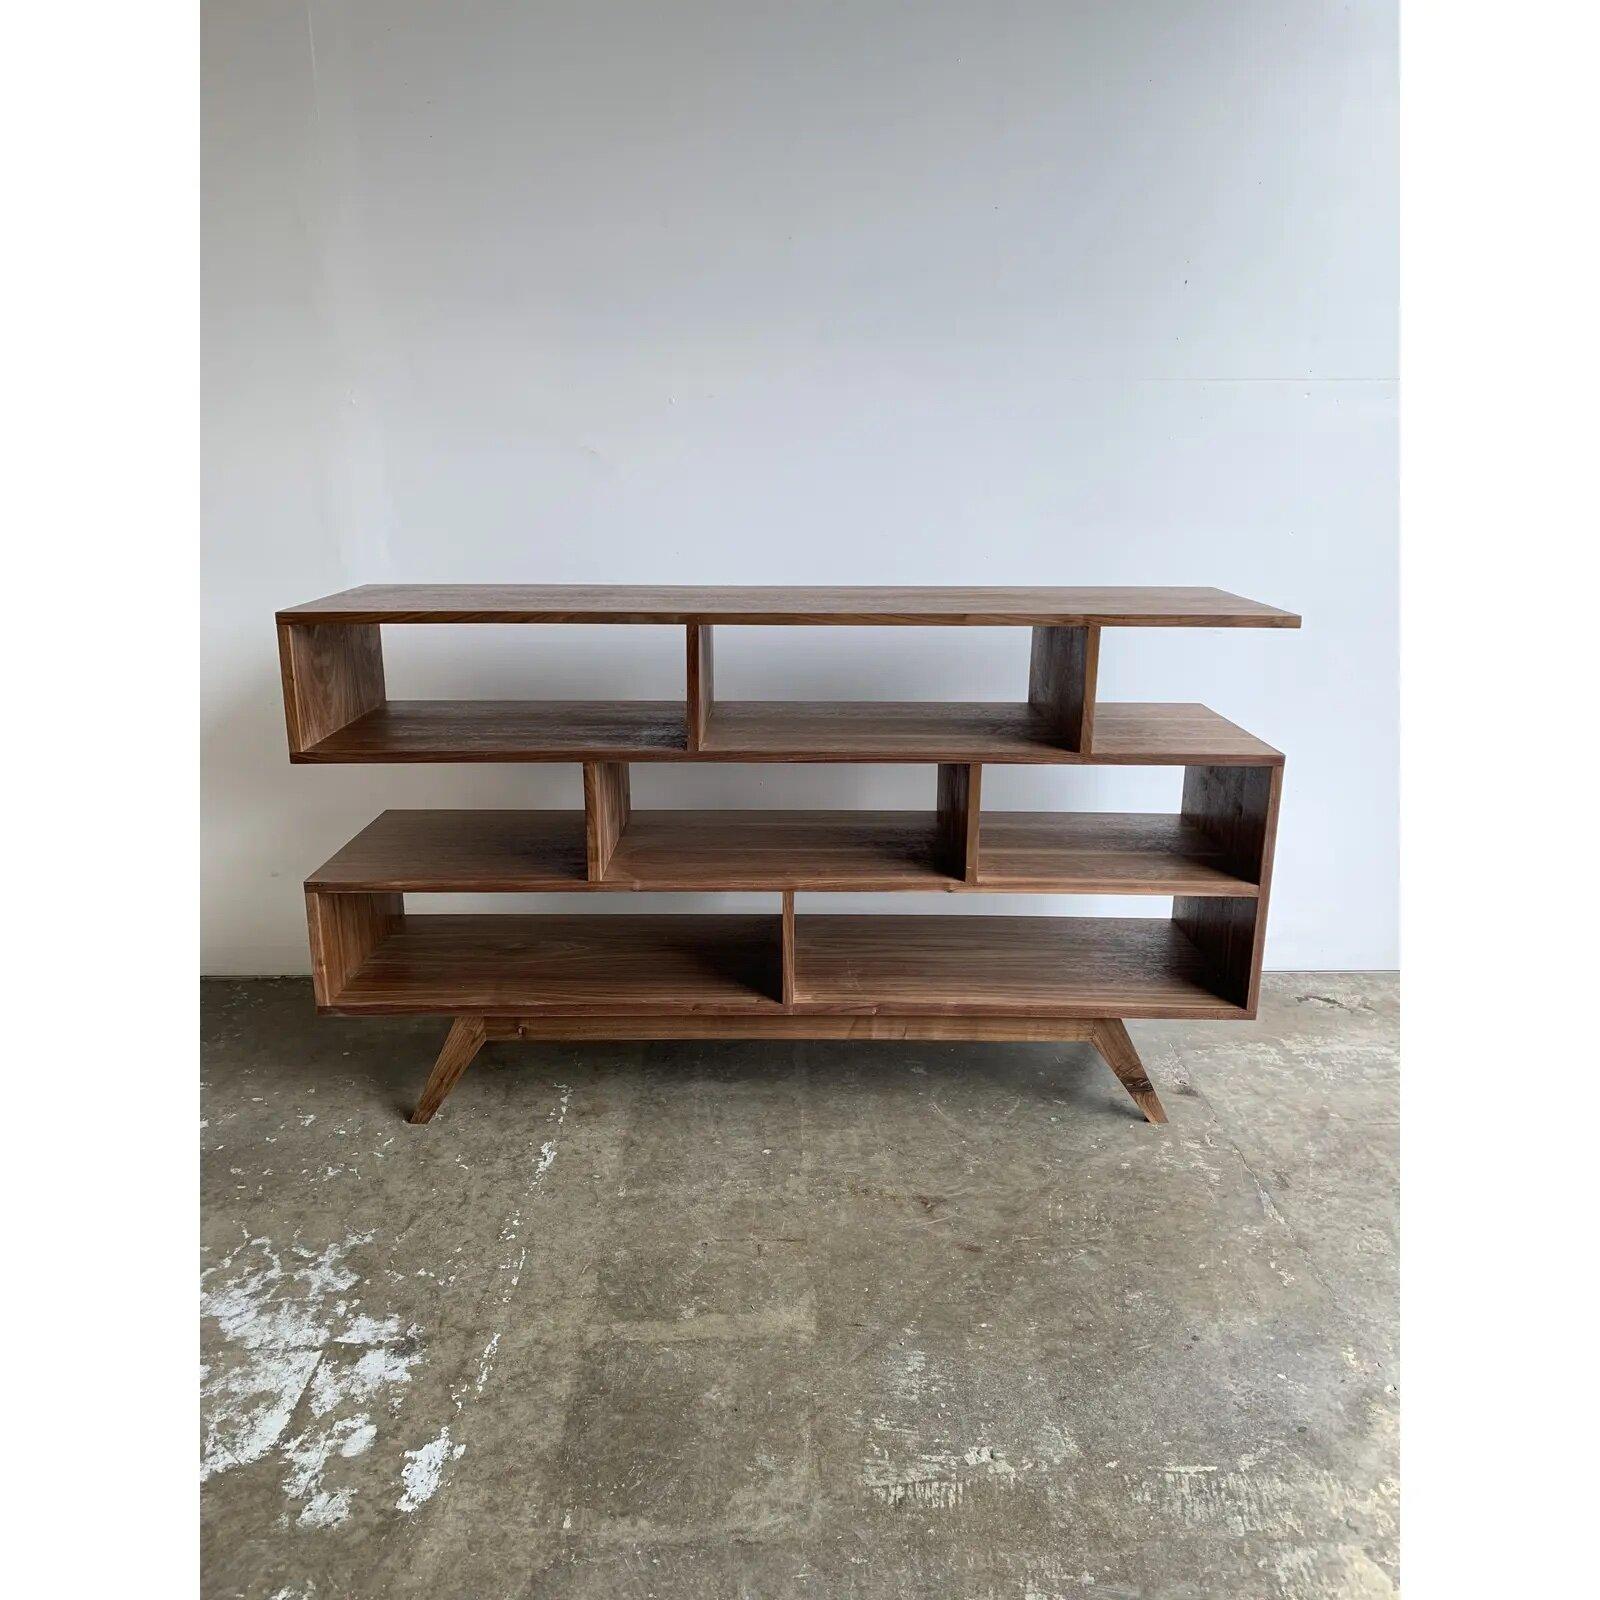 DIMENSIONS60ʺW × 16ʺD × 33.75ʺH

Sharp and clean lines define this bookcase all in a gorgeous natural walnut tone. Handcrafted with completely customizable dimensions.
This item is not currently available on the showroom floor but can be made